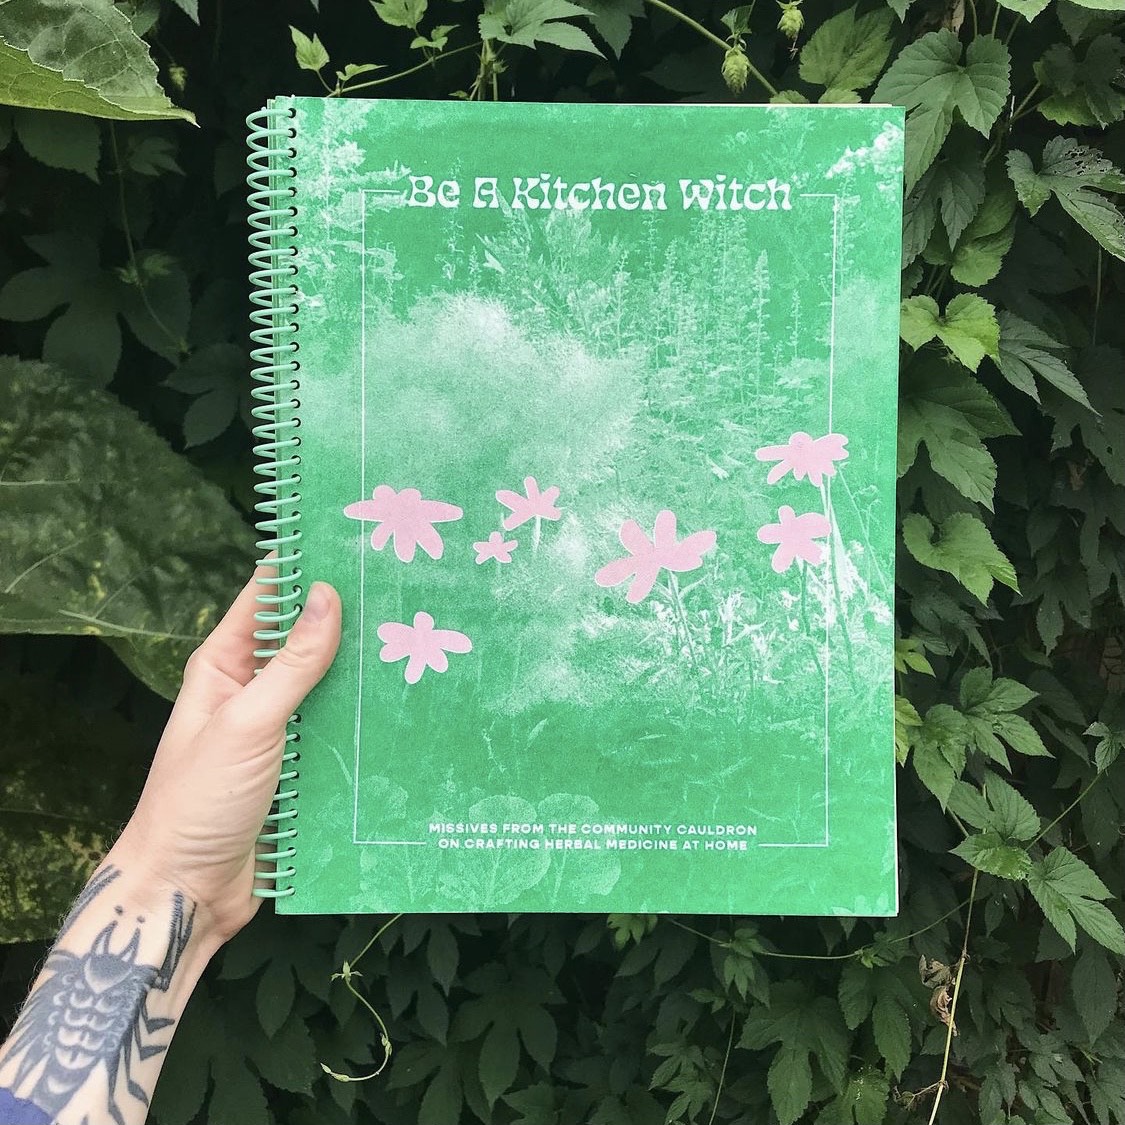 Be A Kitchen Witch: Missives From The Community Cauldron On Crafting Herbal Medicine At Home